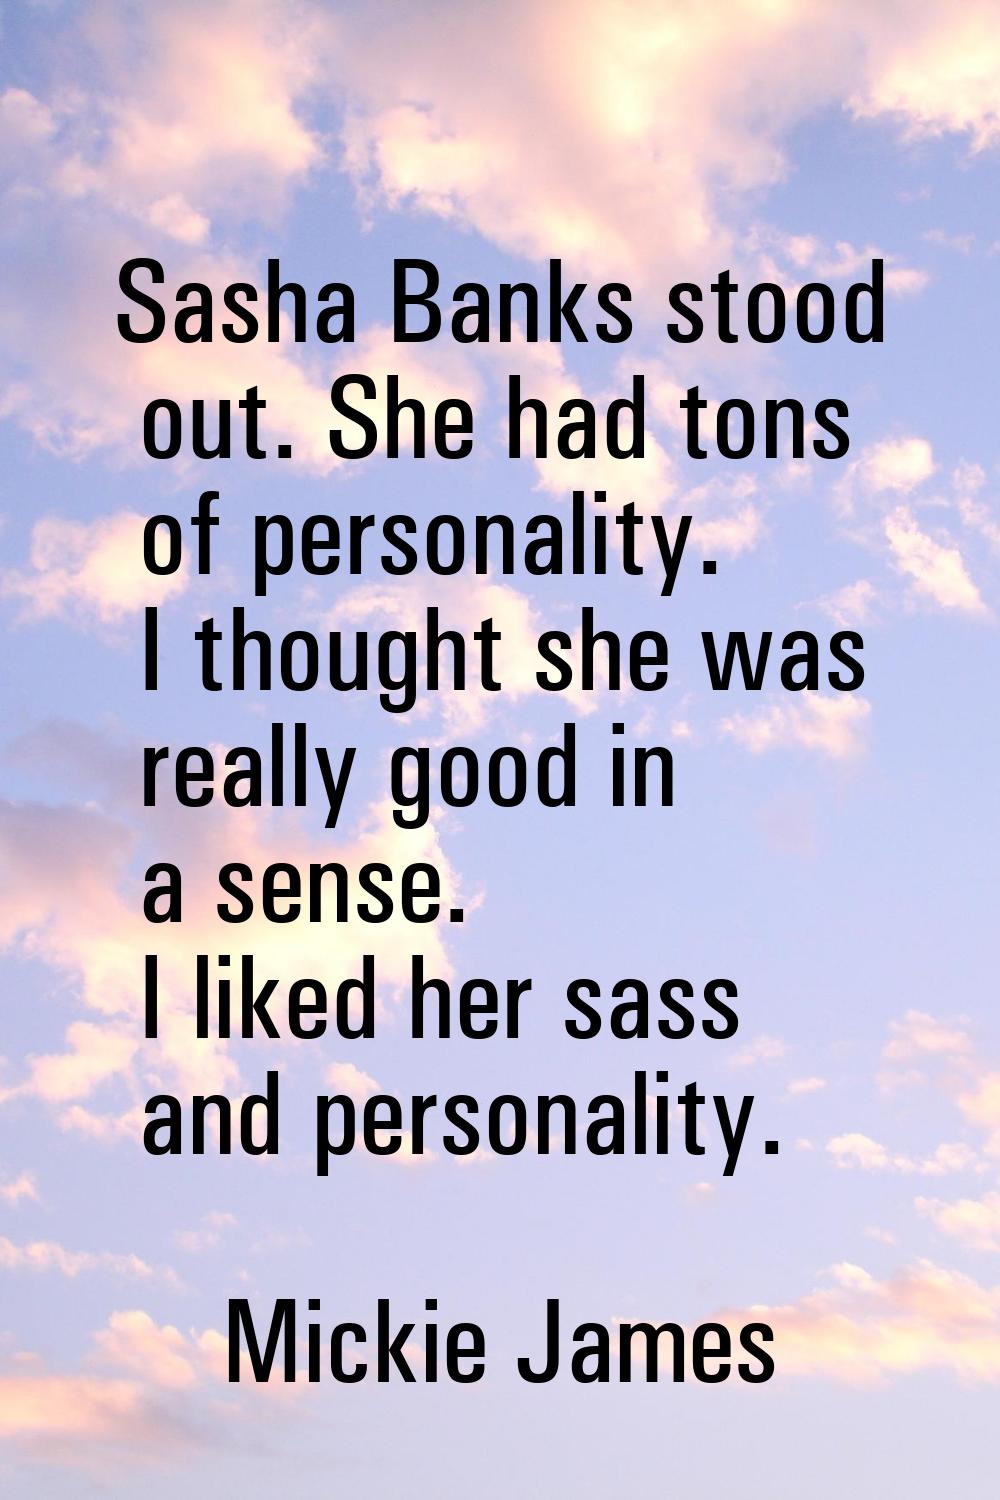 Sasha Banks stood out. She had tons of personality. I thought she was really good in a sense. I lik